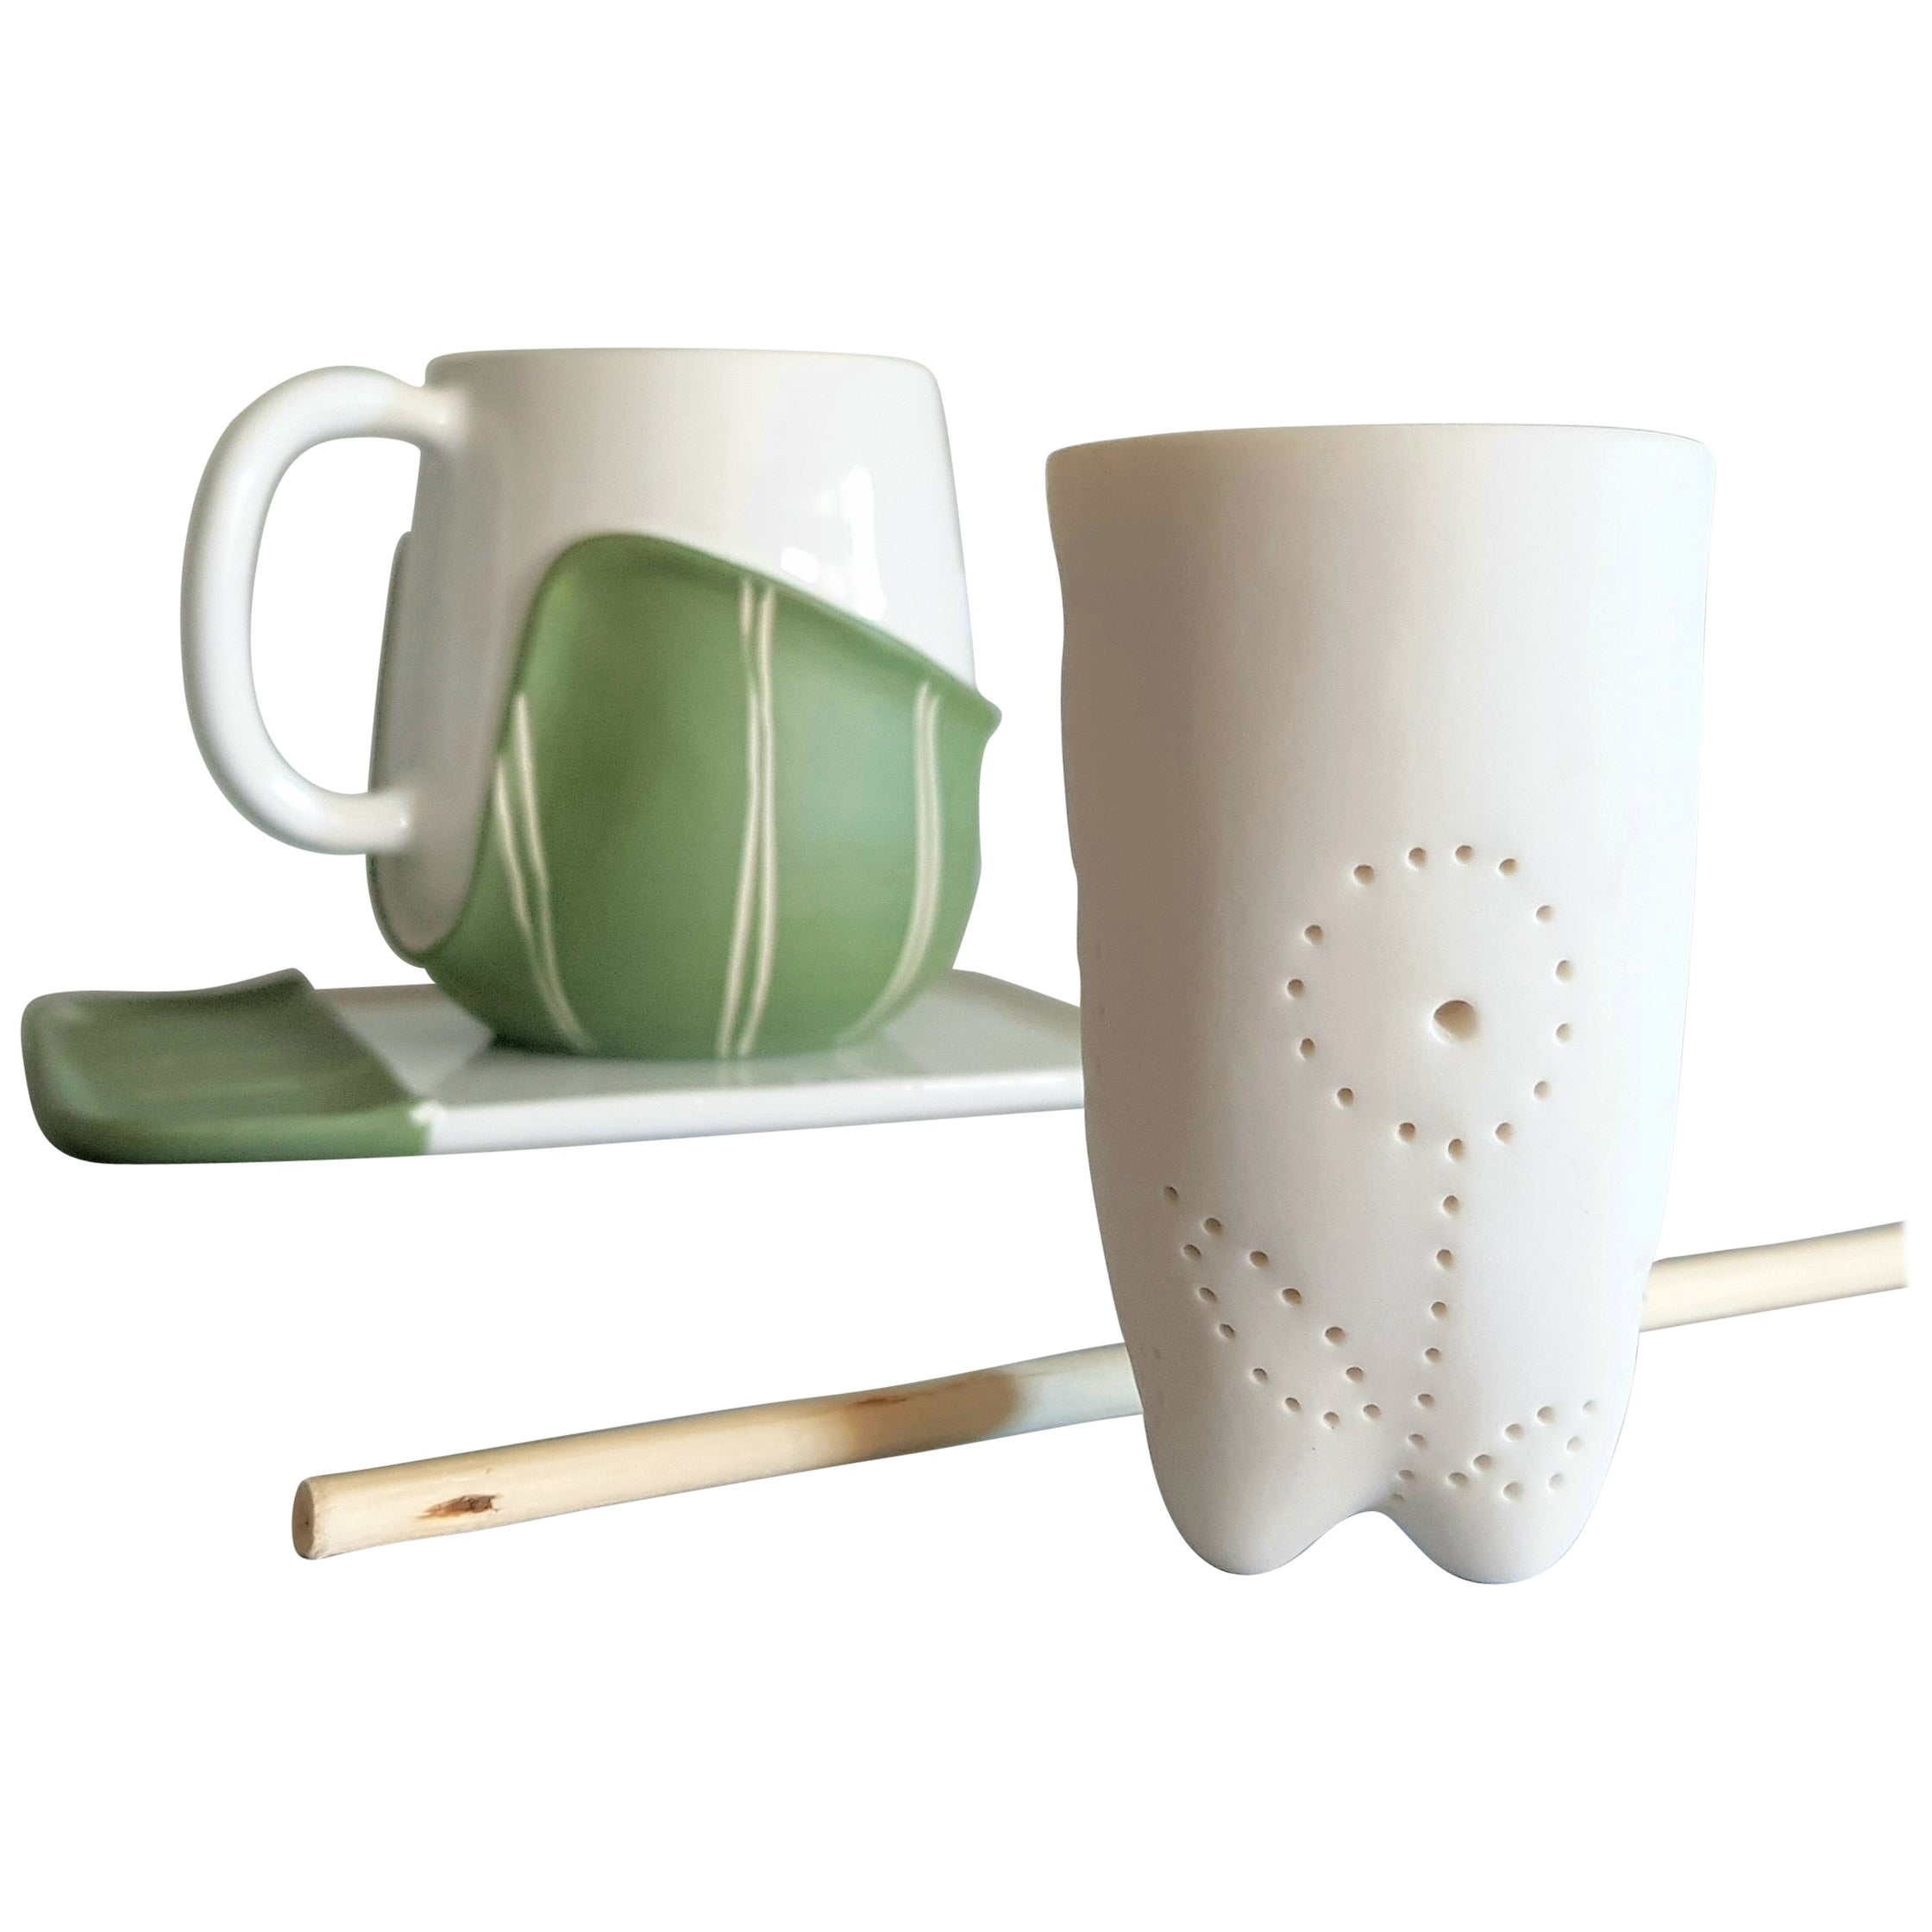 Amélie Tableware and Serveware, Mug and Infuser, Handmade Design in Italy, 2021 For Sale